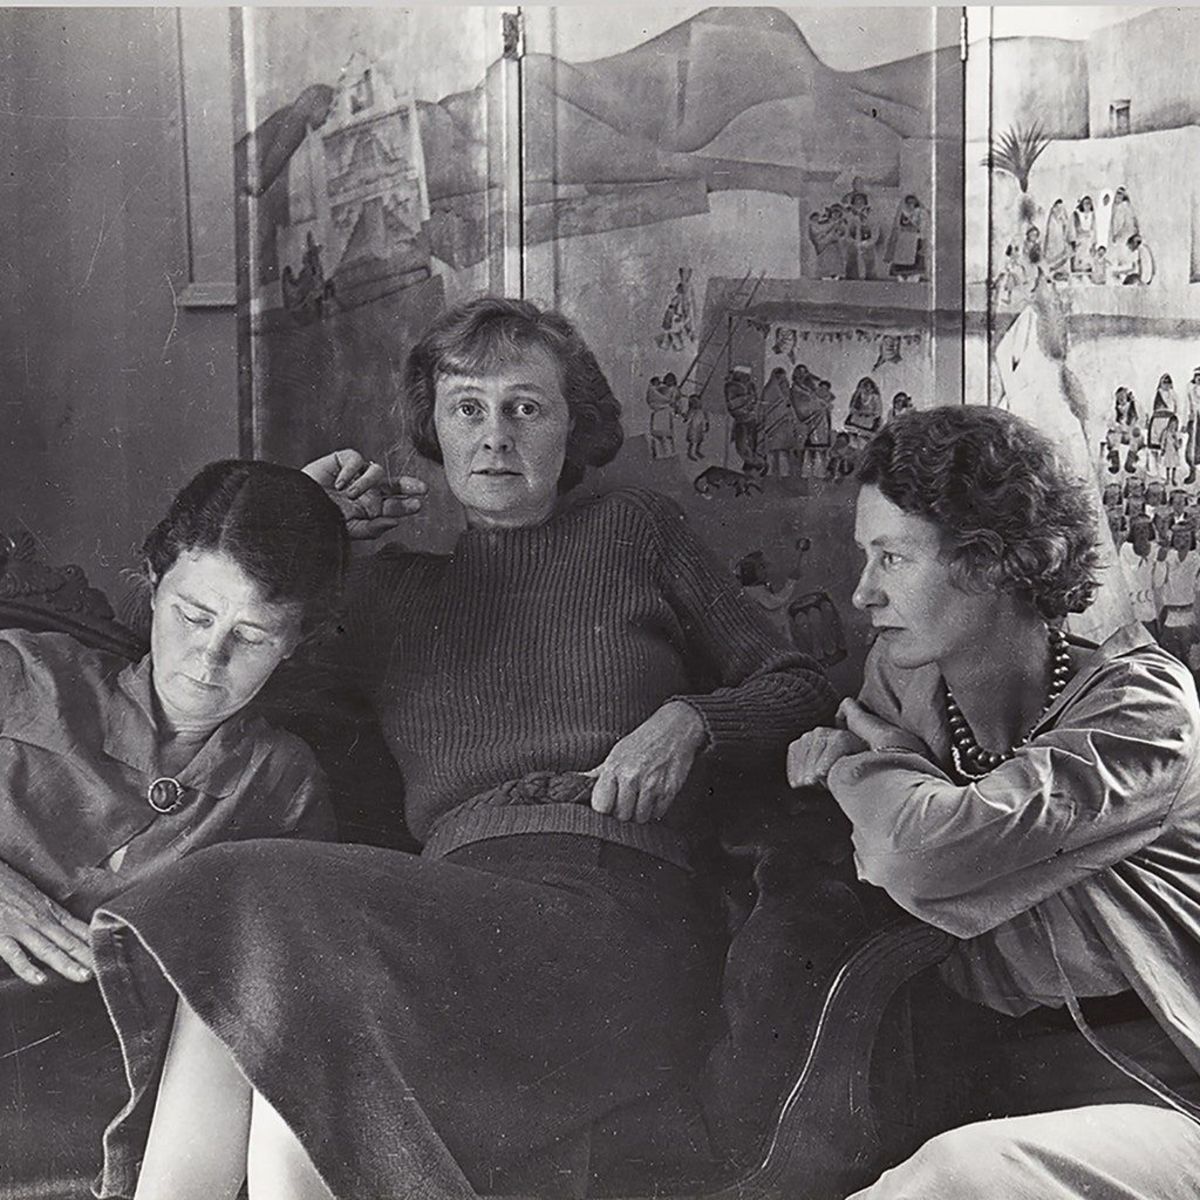 Imogen Cunningham’s 1936 Portrait of the Bruton Sisters